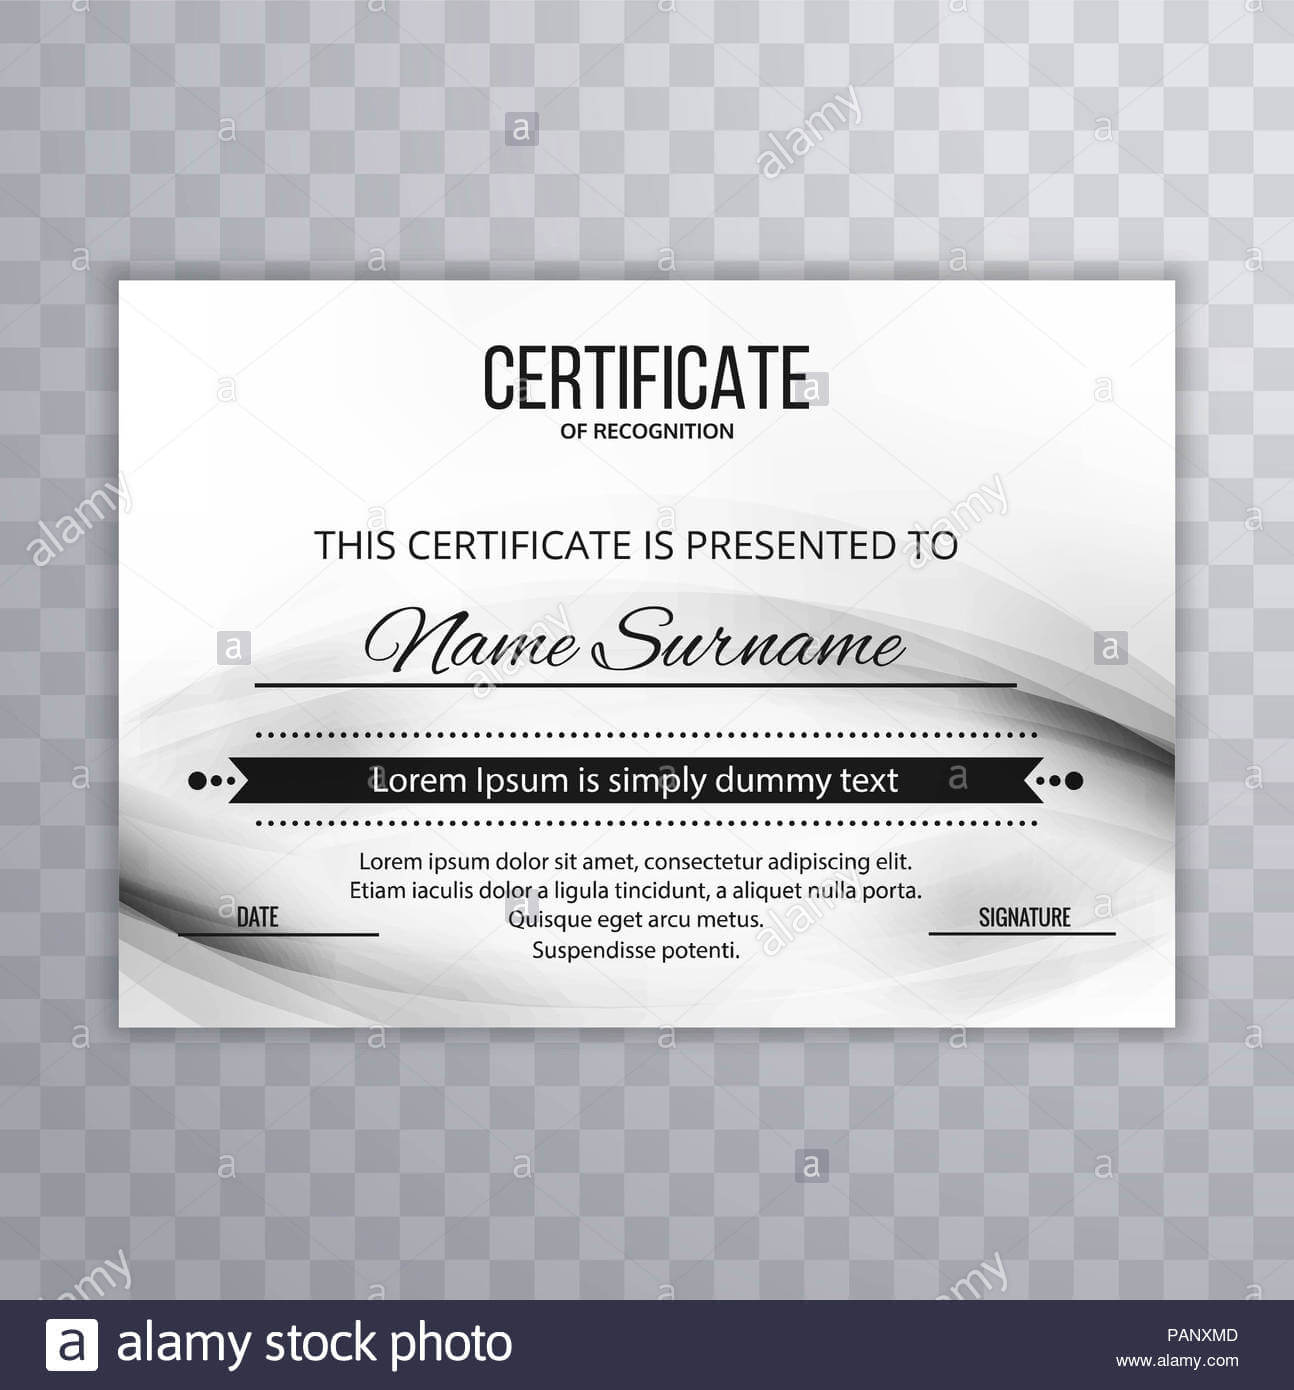 Modern Certificate Template Design Stock Photo: 213152925 Within Borderless Certificate Templates